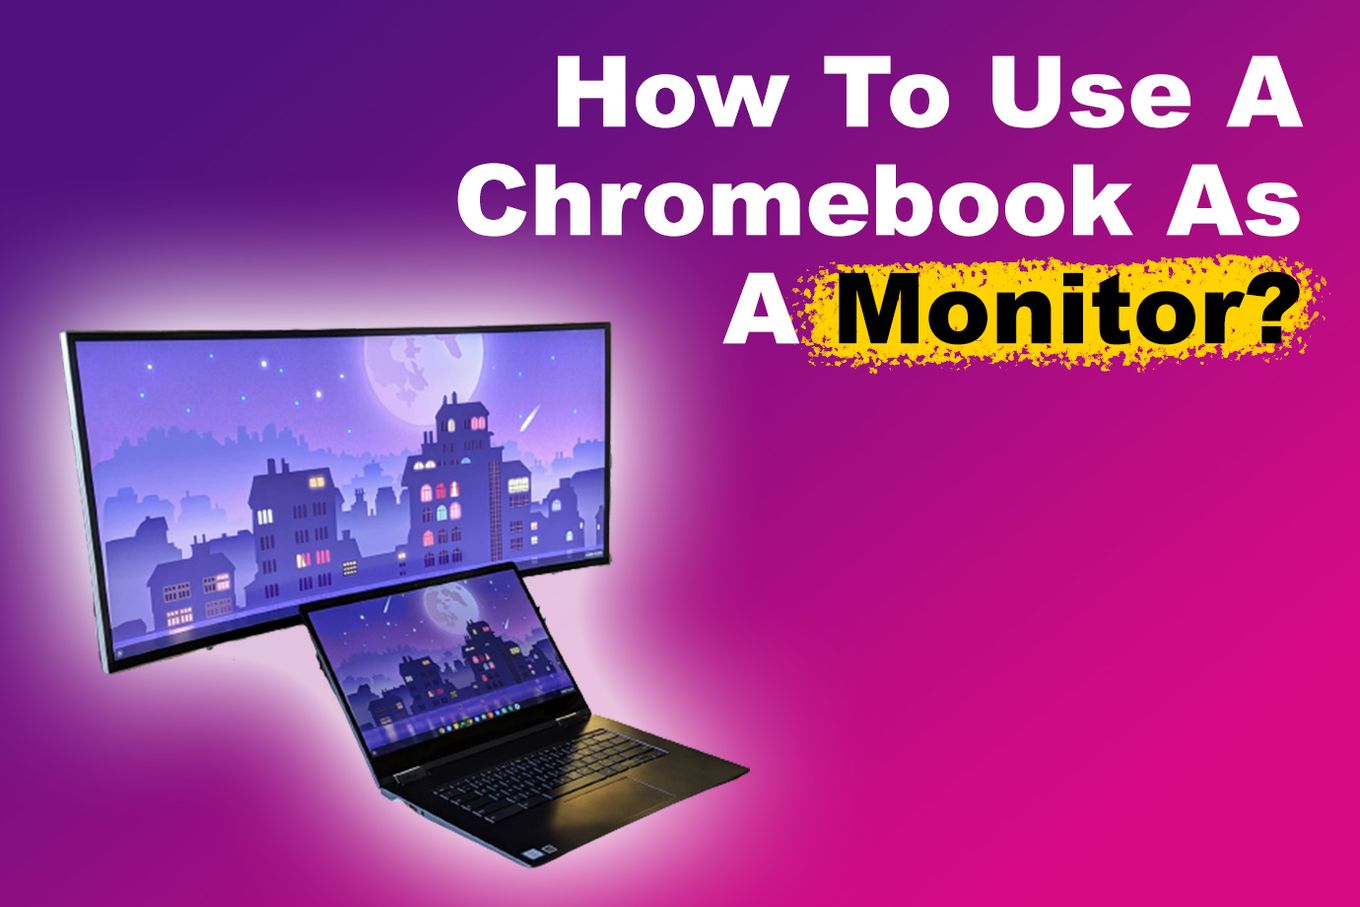 How To Use A Chromebook As A Monitor